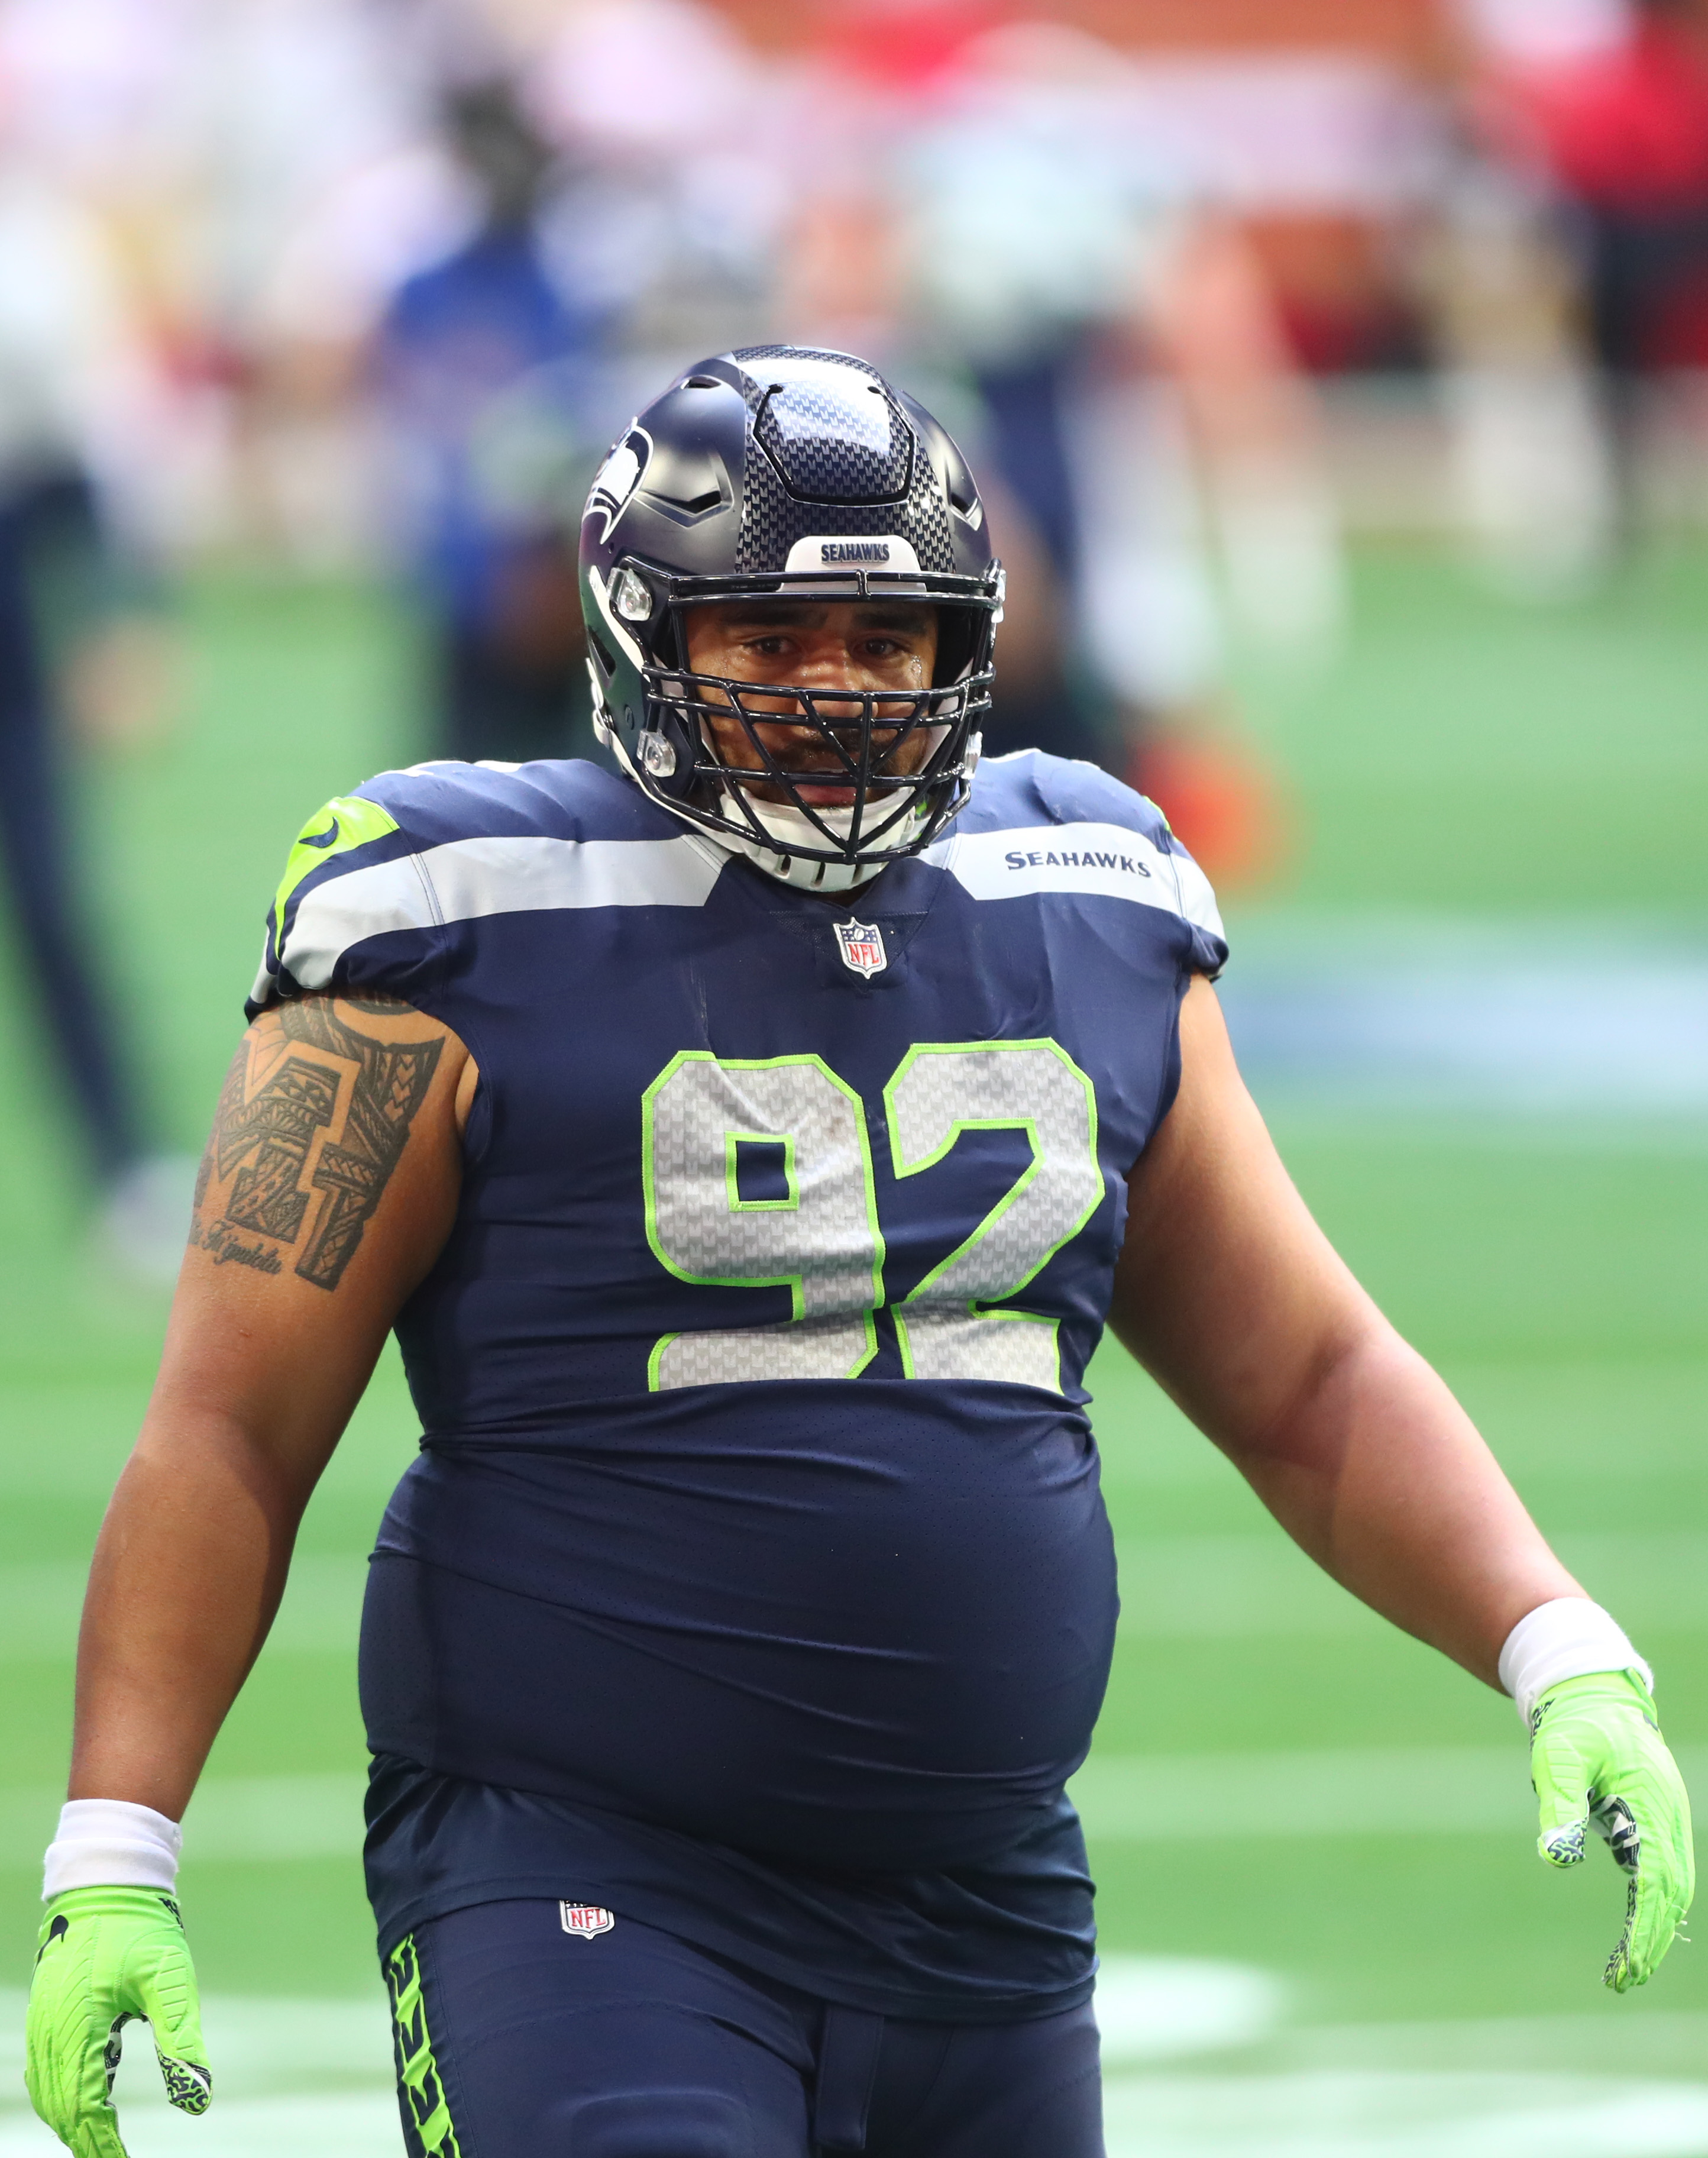 Seahawks To Re-Sign DT Bryan Mone